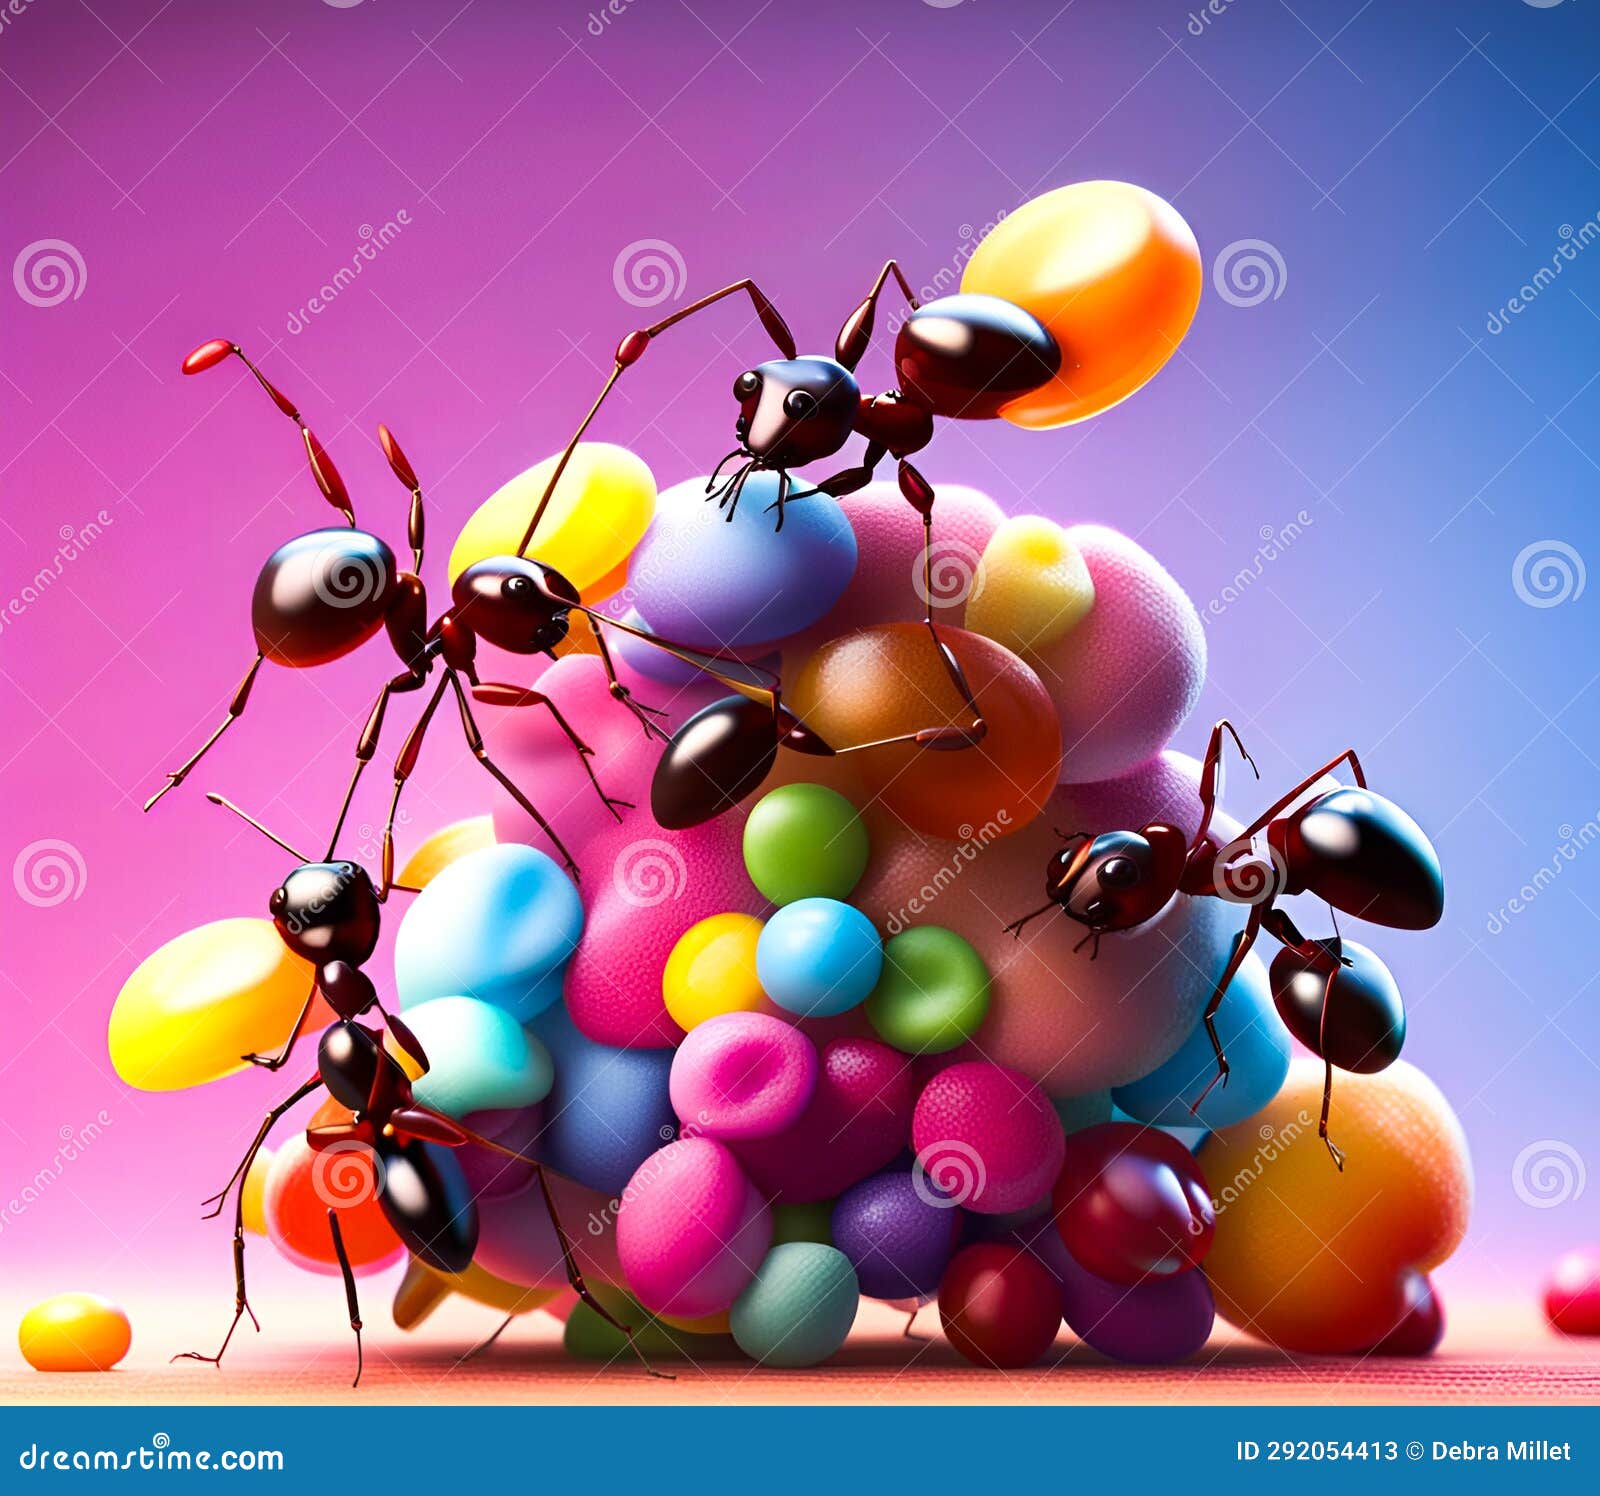 Ants on a pile of candy stock illustration. Illustration of pink ...